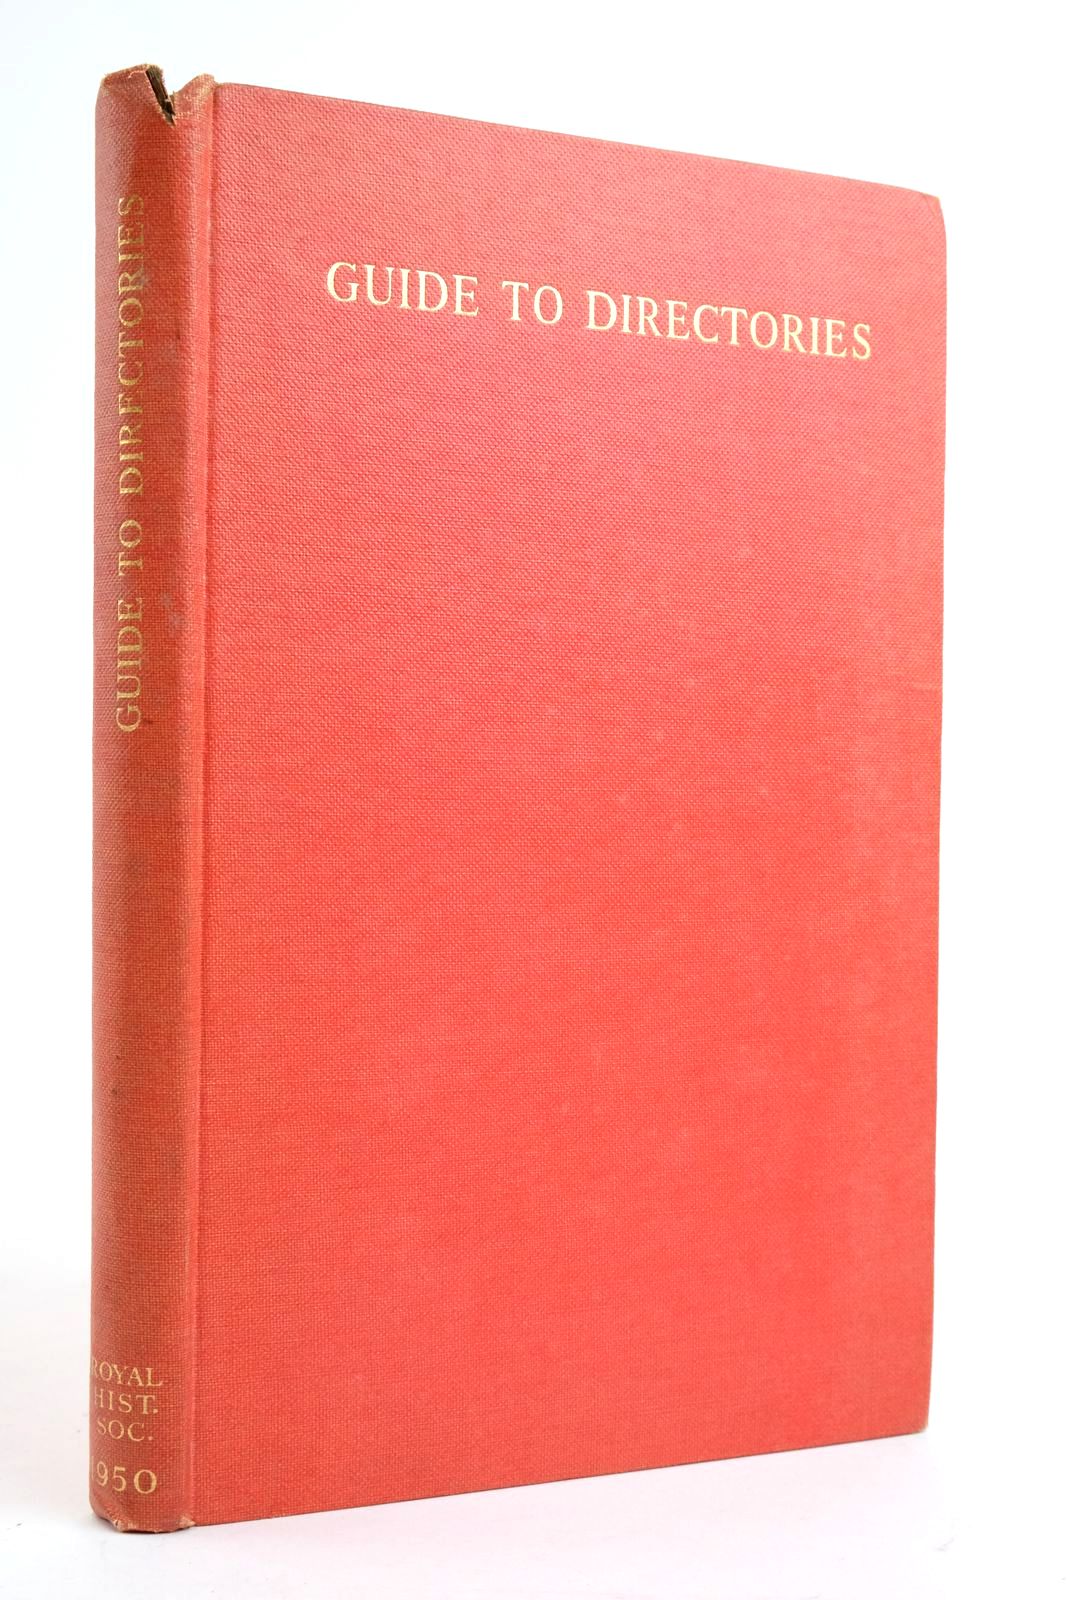 Photo of GUIDE TO THE NATIONAL AND PROVINCIAL DIRECTORIES OF ENGLAND AND WALES, EXCLUDING LONDON, PUBLISHED BEFORE 1856 written by Norton, Jane E. published by The Royal Historical Society (STOCK CODE: 2136107)  for sale by Stella & Rose's Books